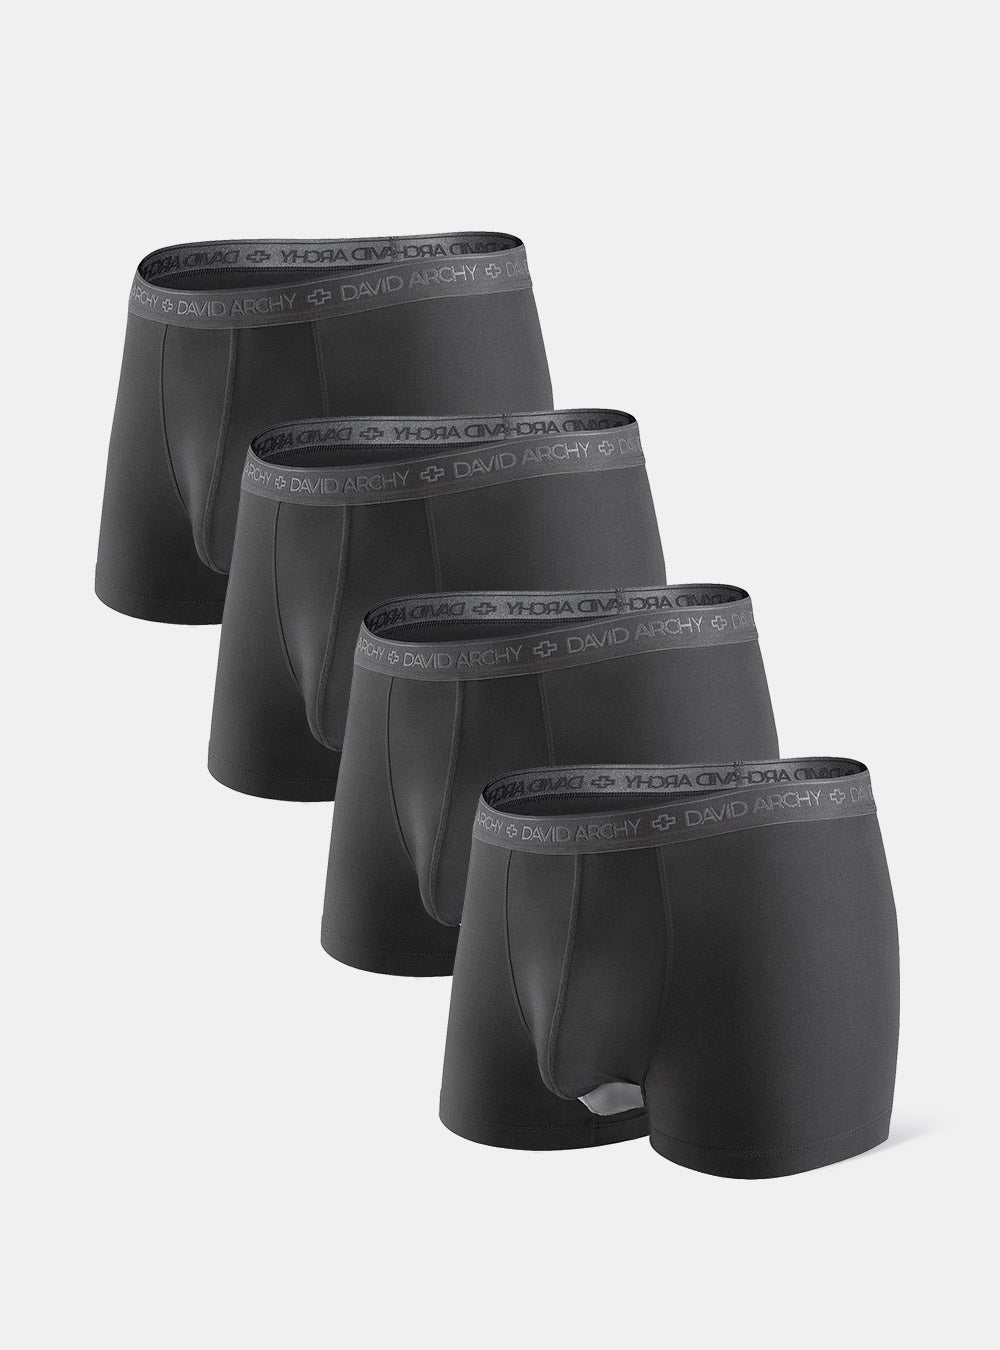 Separate Modal Dual Pouch Trunks